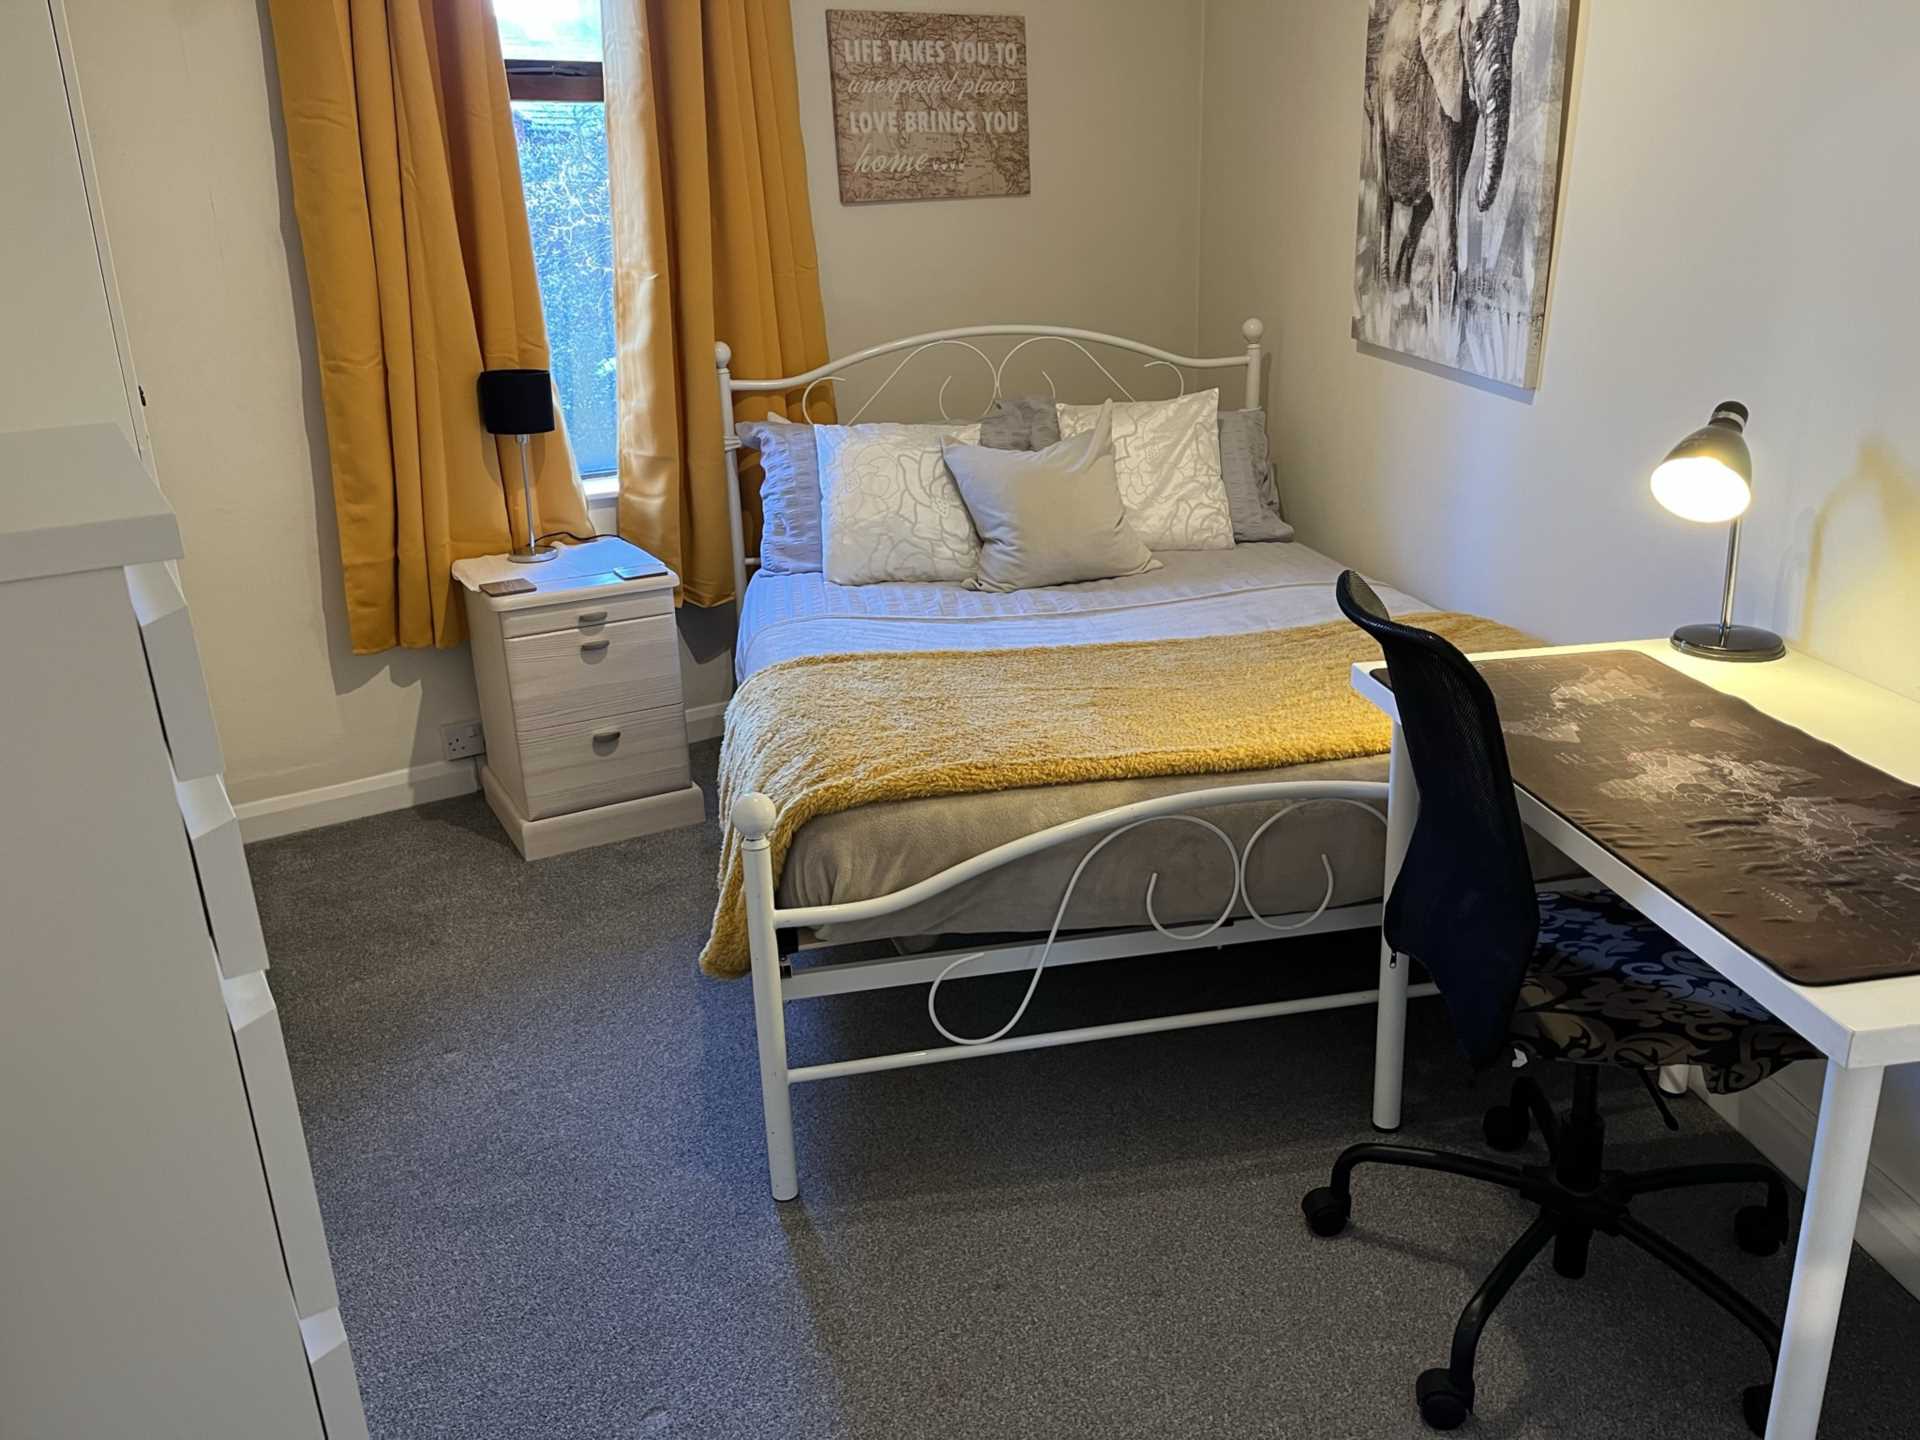 4 bed Room for rent in Guildford. From New Leaf Homes